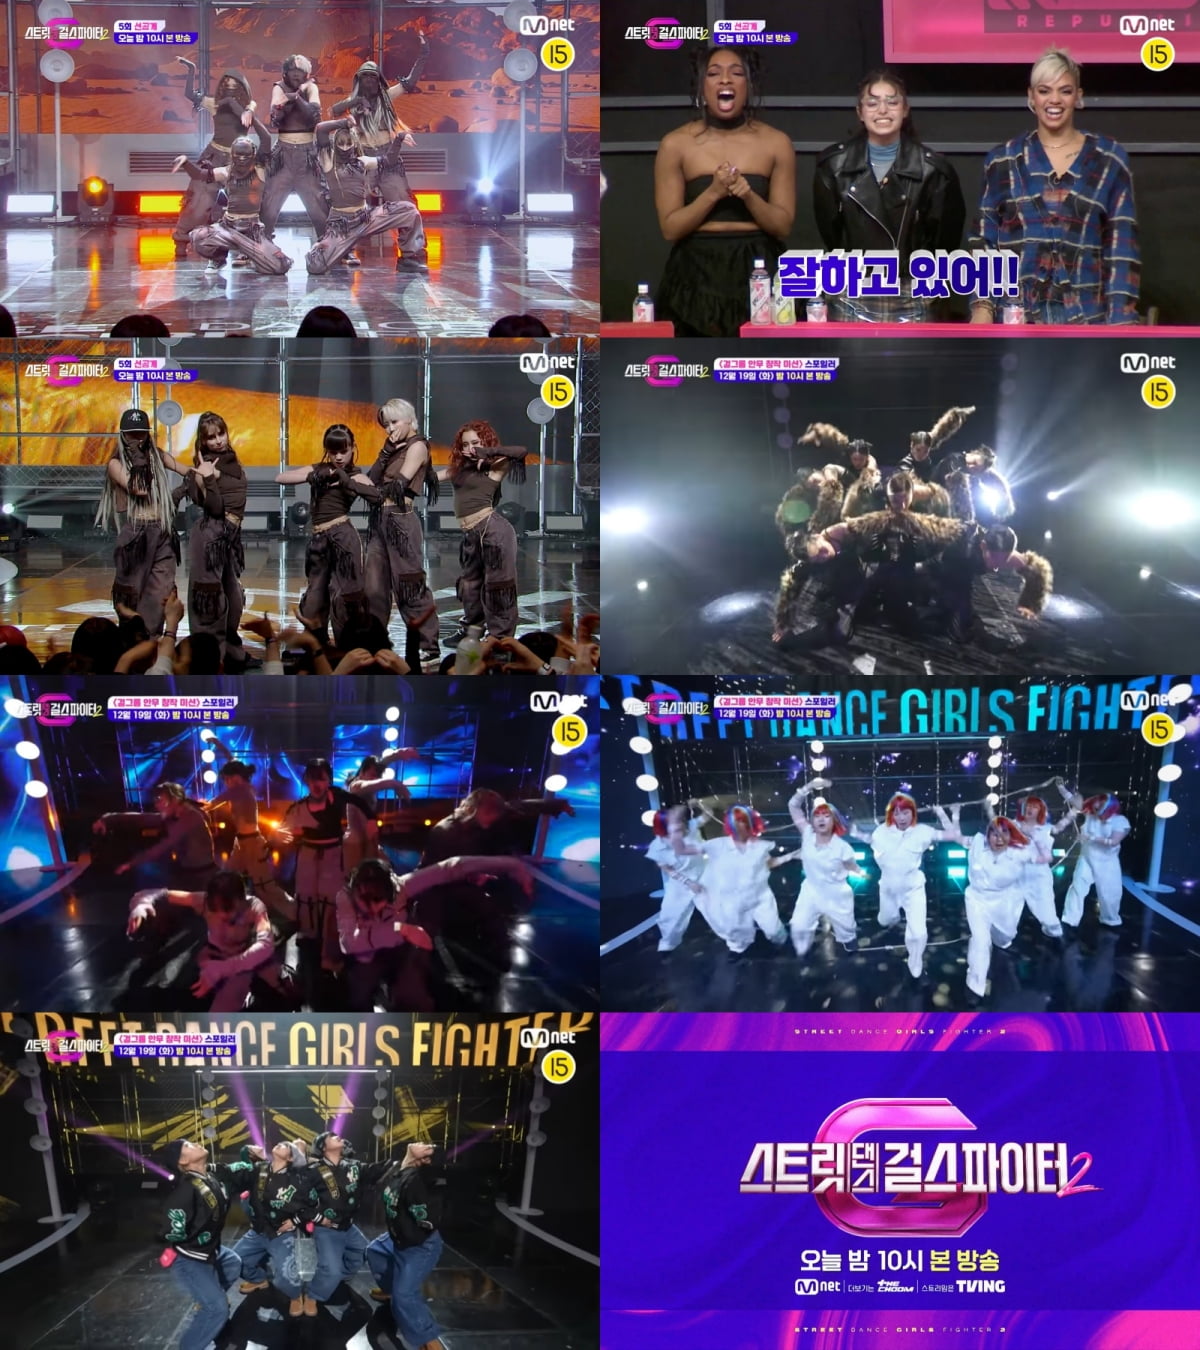 'Street Dance Girls Fighter 2' determines the 4 teams that will advance to the final live broadcast